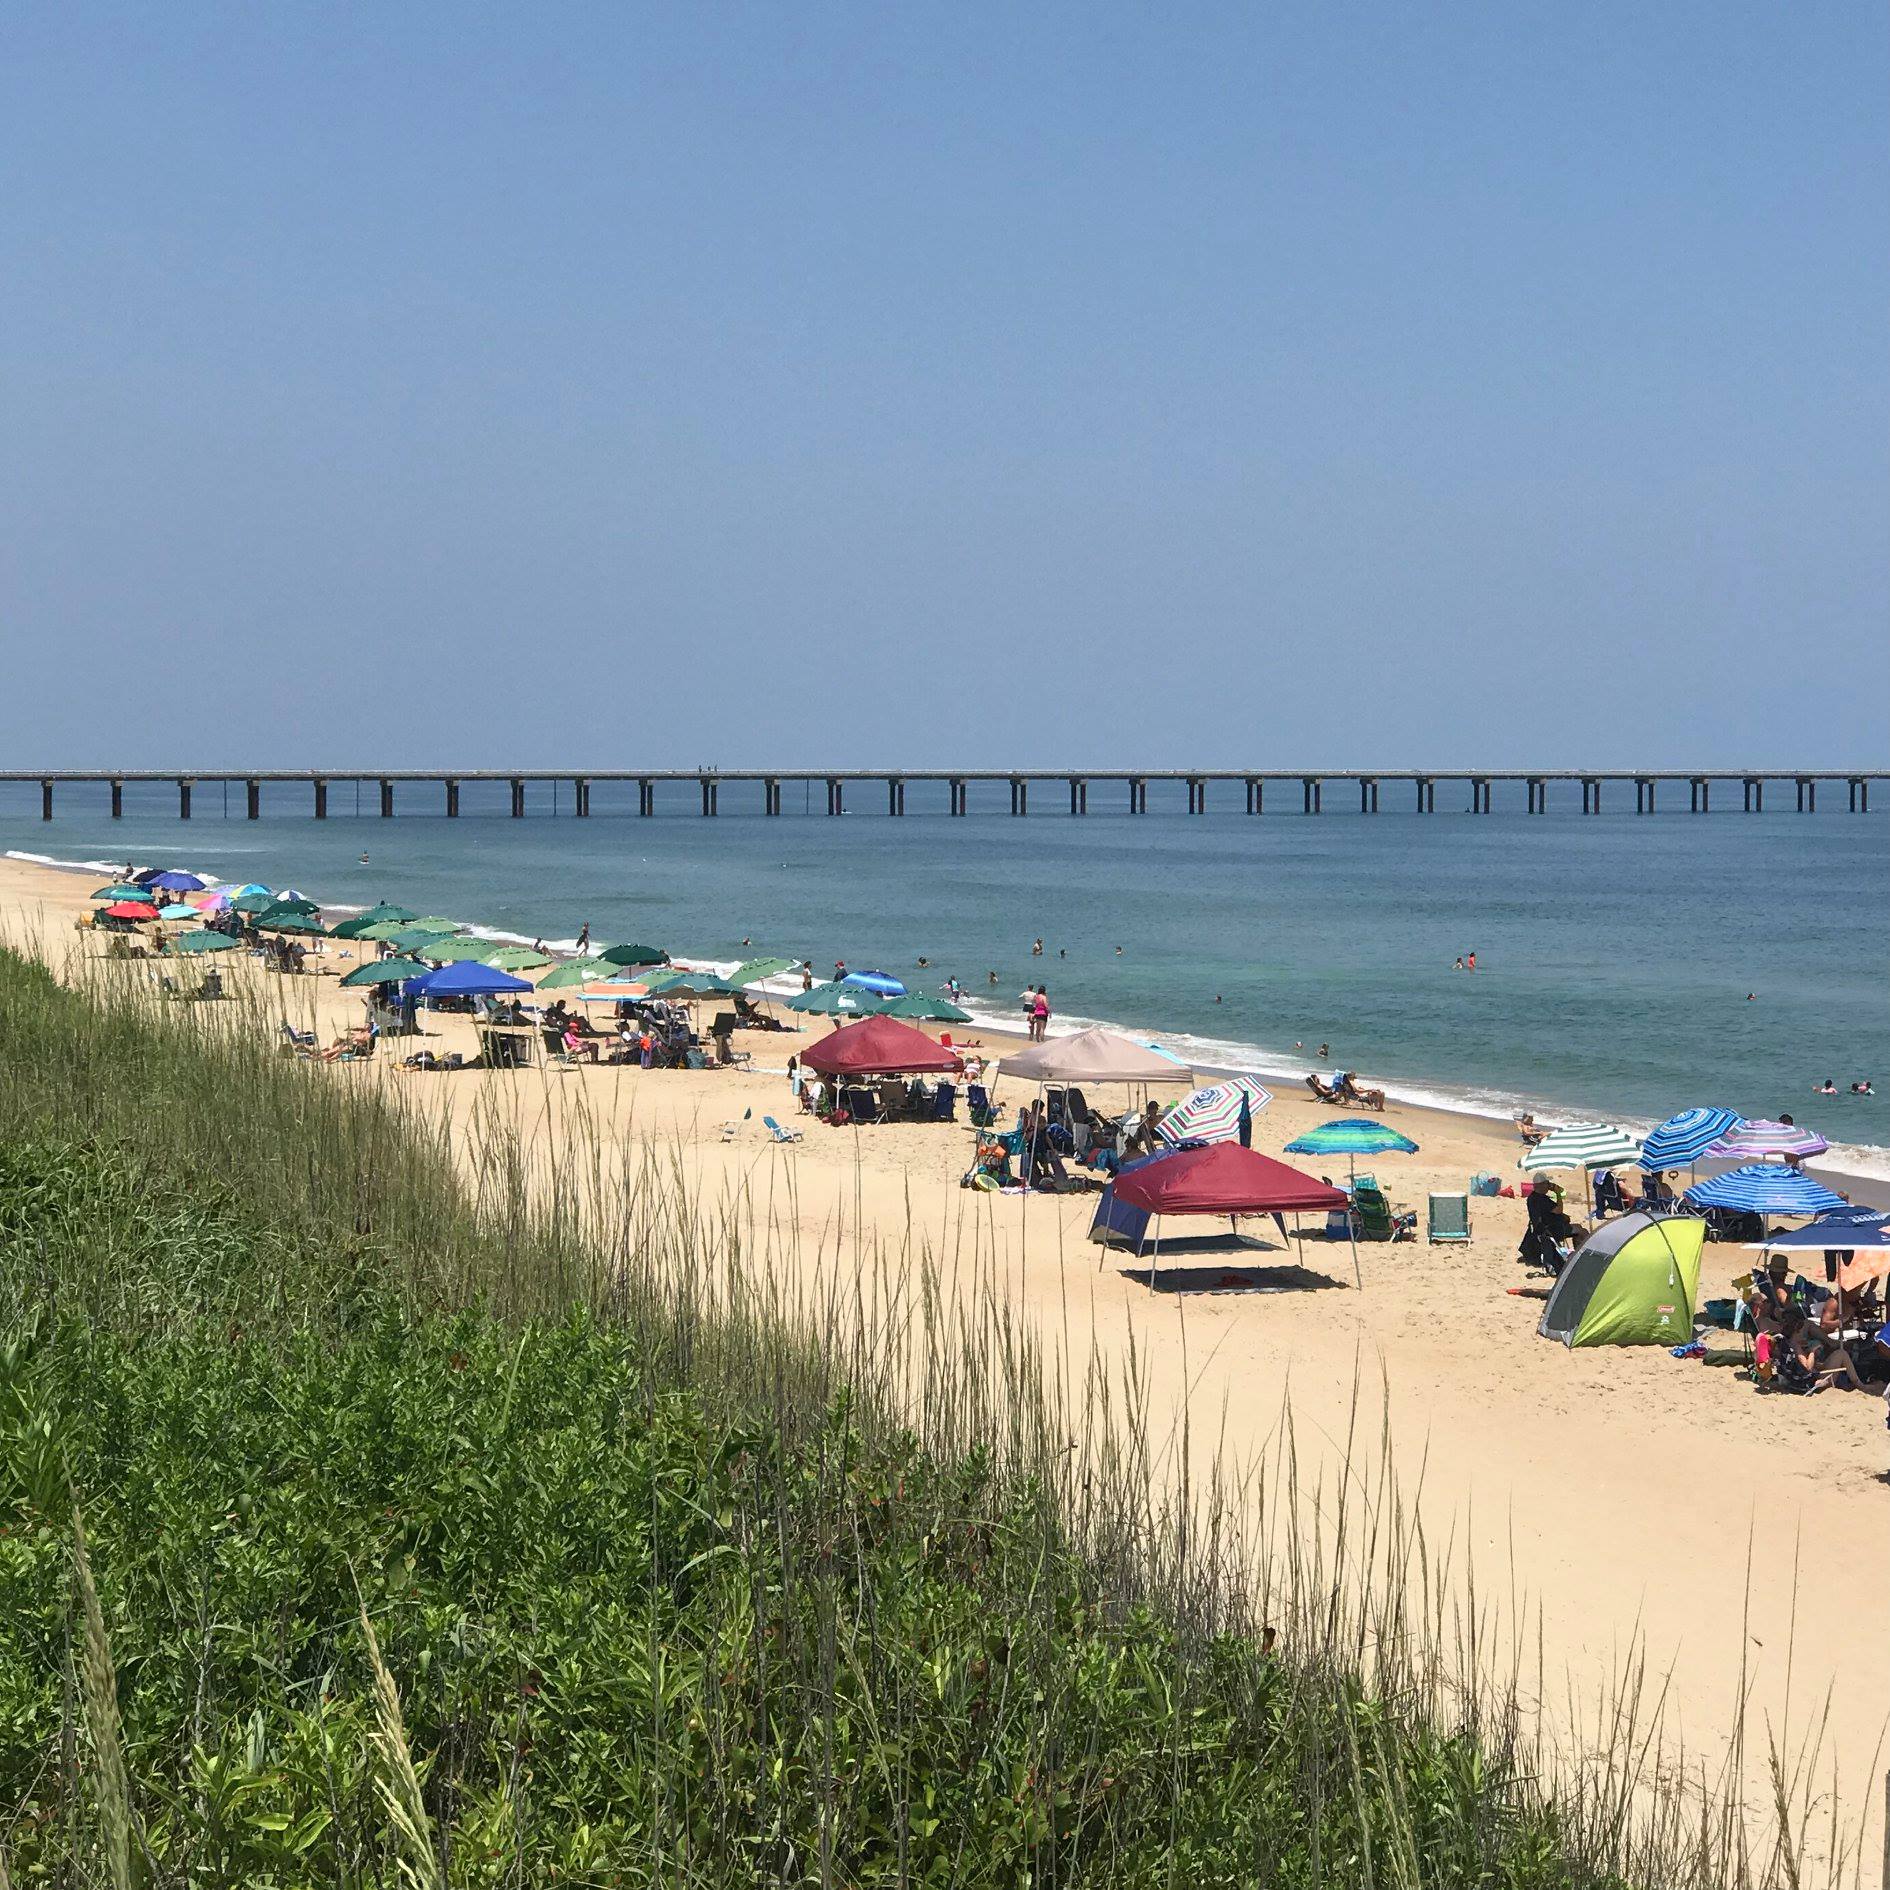 Summer bookings in Dare down 10% from last year; N.C. residents pass Ohio for booking the Outer Banks